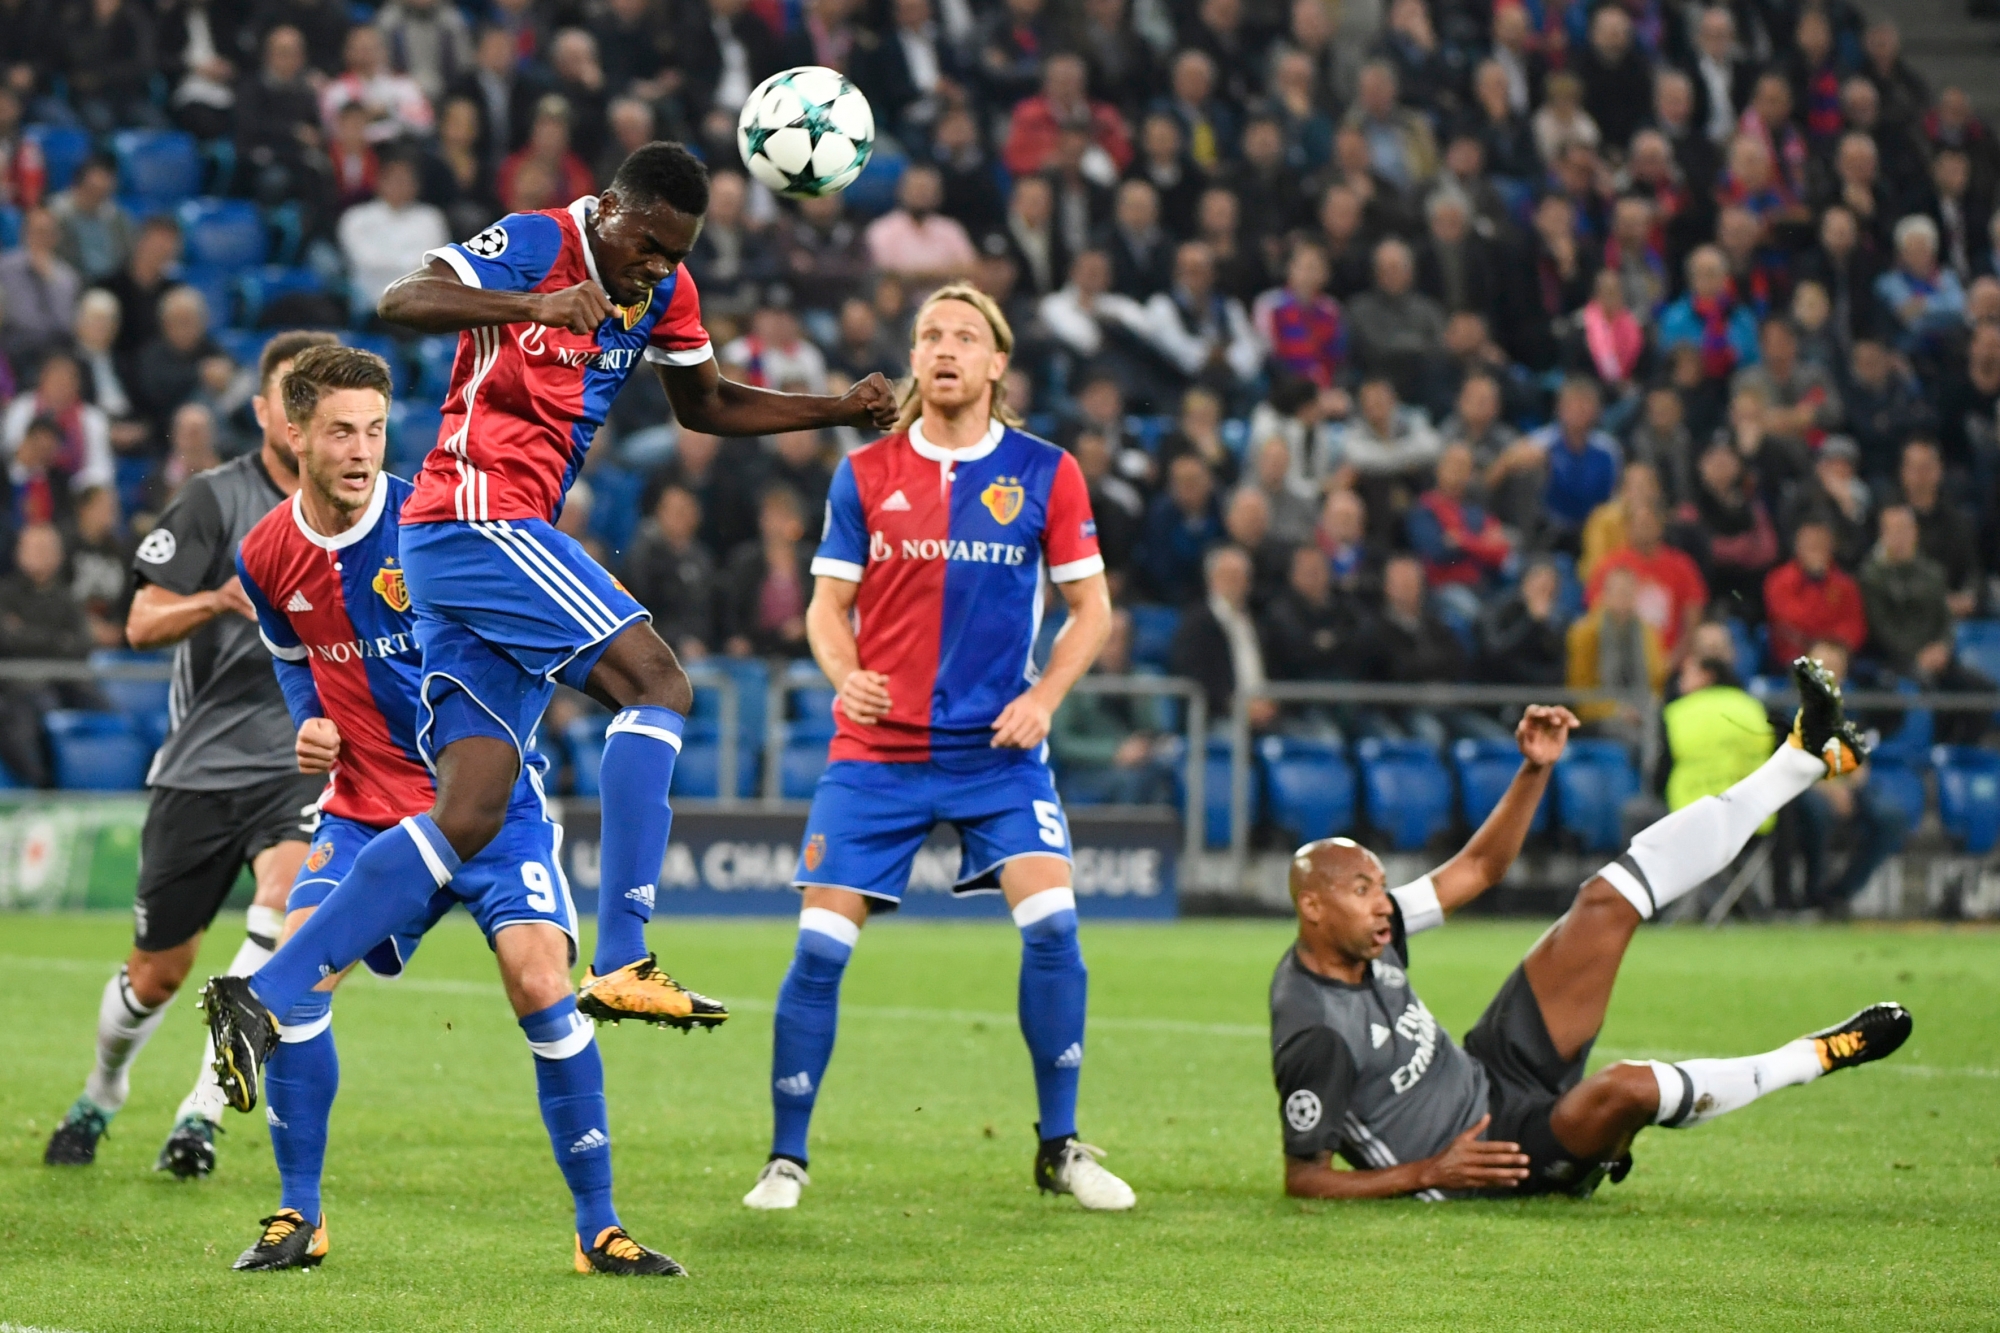 Basel's Dimitri Oberlin, 2nd left, tries a header in front of his teammates Ricky van Wolfswinkel, left, and Michael Lang, center, with Benfica's Luisao on the ground, right, during an UEFA Champions League Group stage Group A matchday 2 soccer match between Switzerland's FC Basel 1893 and Portugal's SL Benfica in the St. Jakob-Park stadium in Basel, Switzerland, on Wednesday, September 27, 2017. (KEYSTONE/Georgios Kefalas) SWITZERLAND SOCCER CHAMPIONS LEAGUE BASEL BENFICA